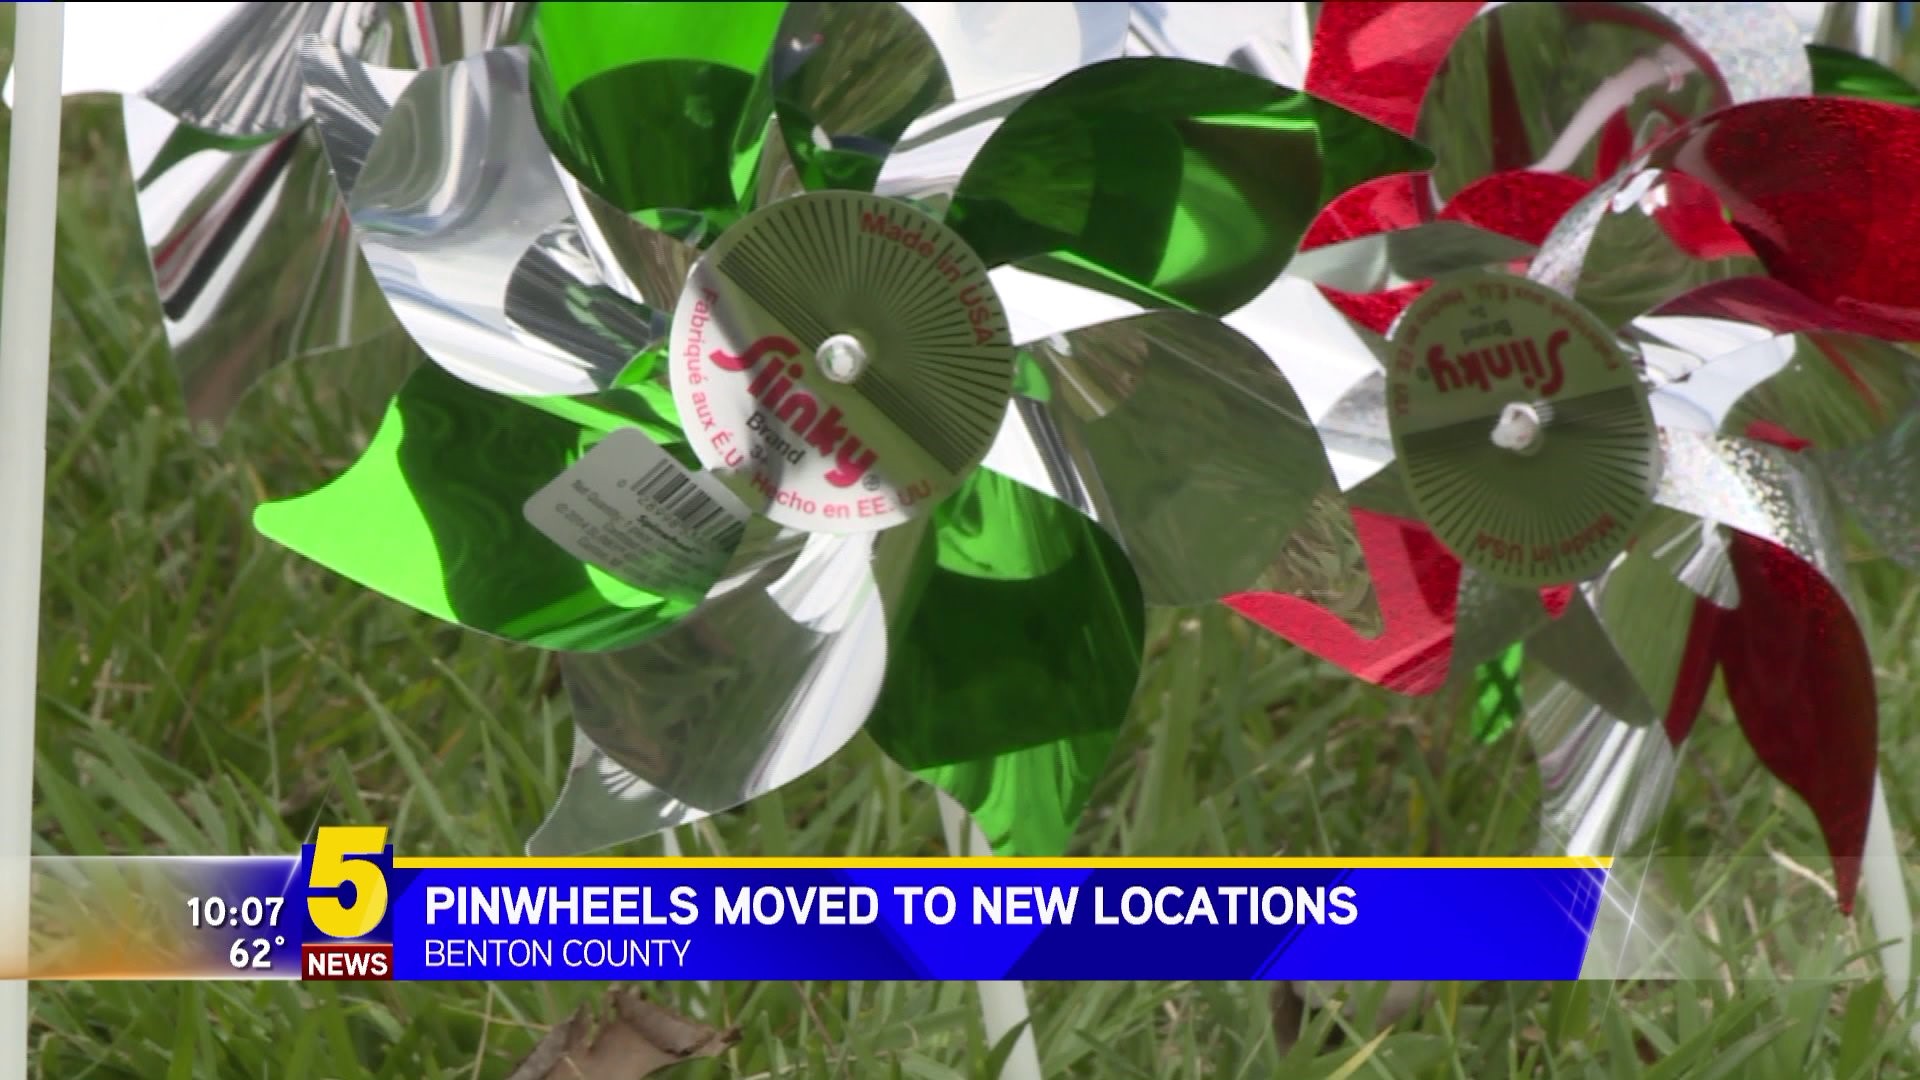 Pinwheels Moved To New Locations